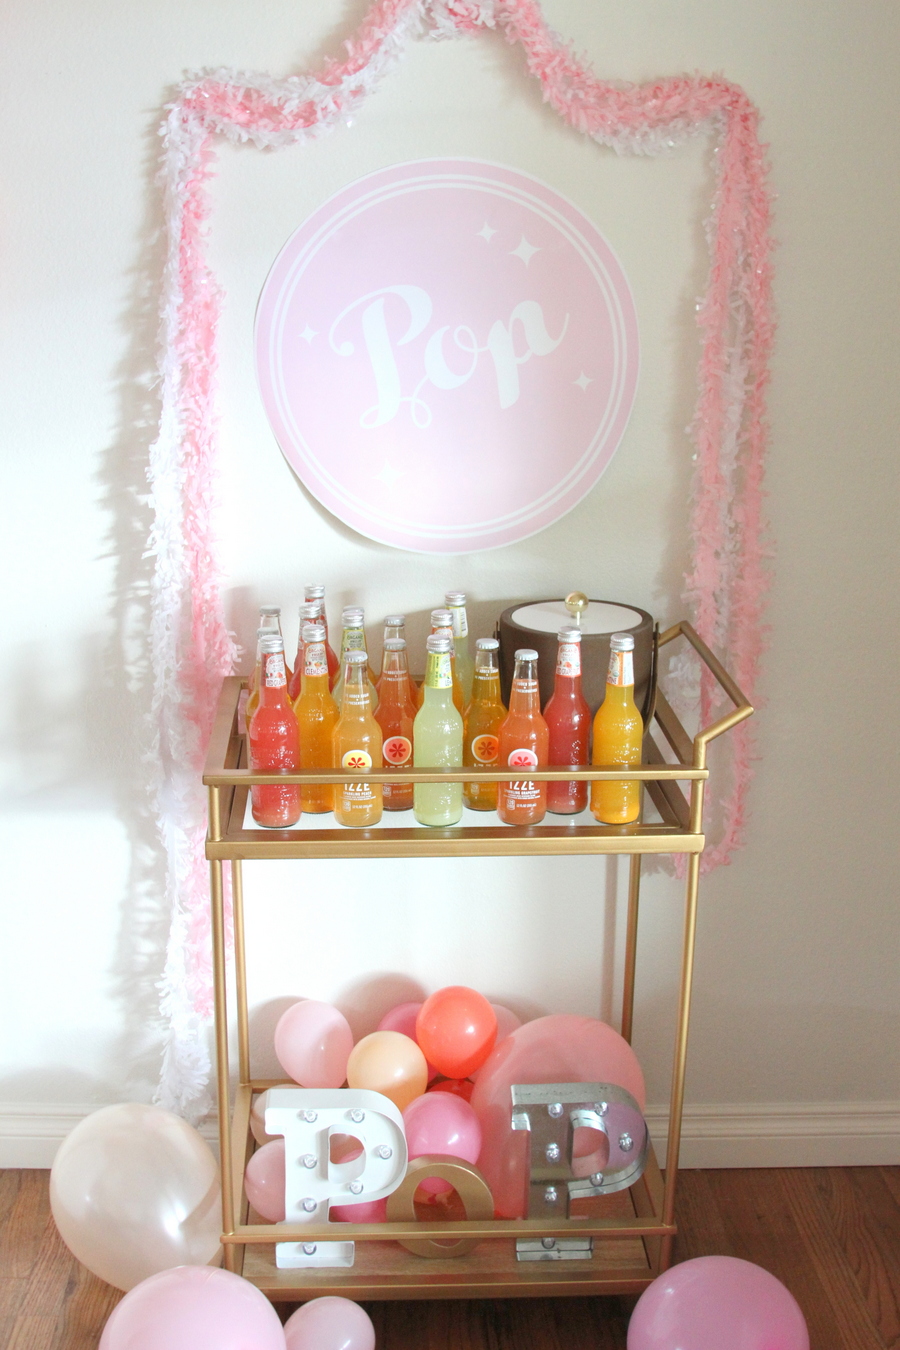 Looking for an easy (and inexpensive!) way to add "wow" to your next party? This Soda Pop Bar is perfection! So cute, but easy on the budget and on the prep time.